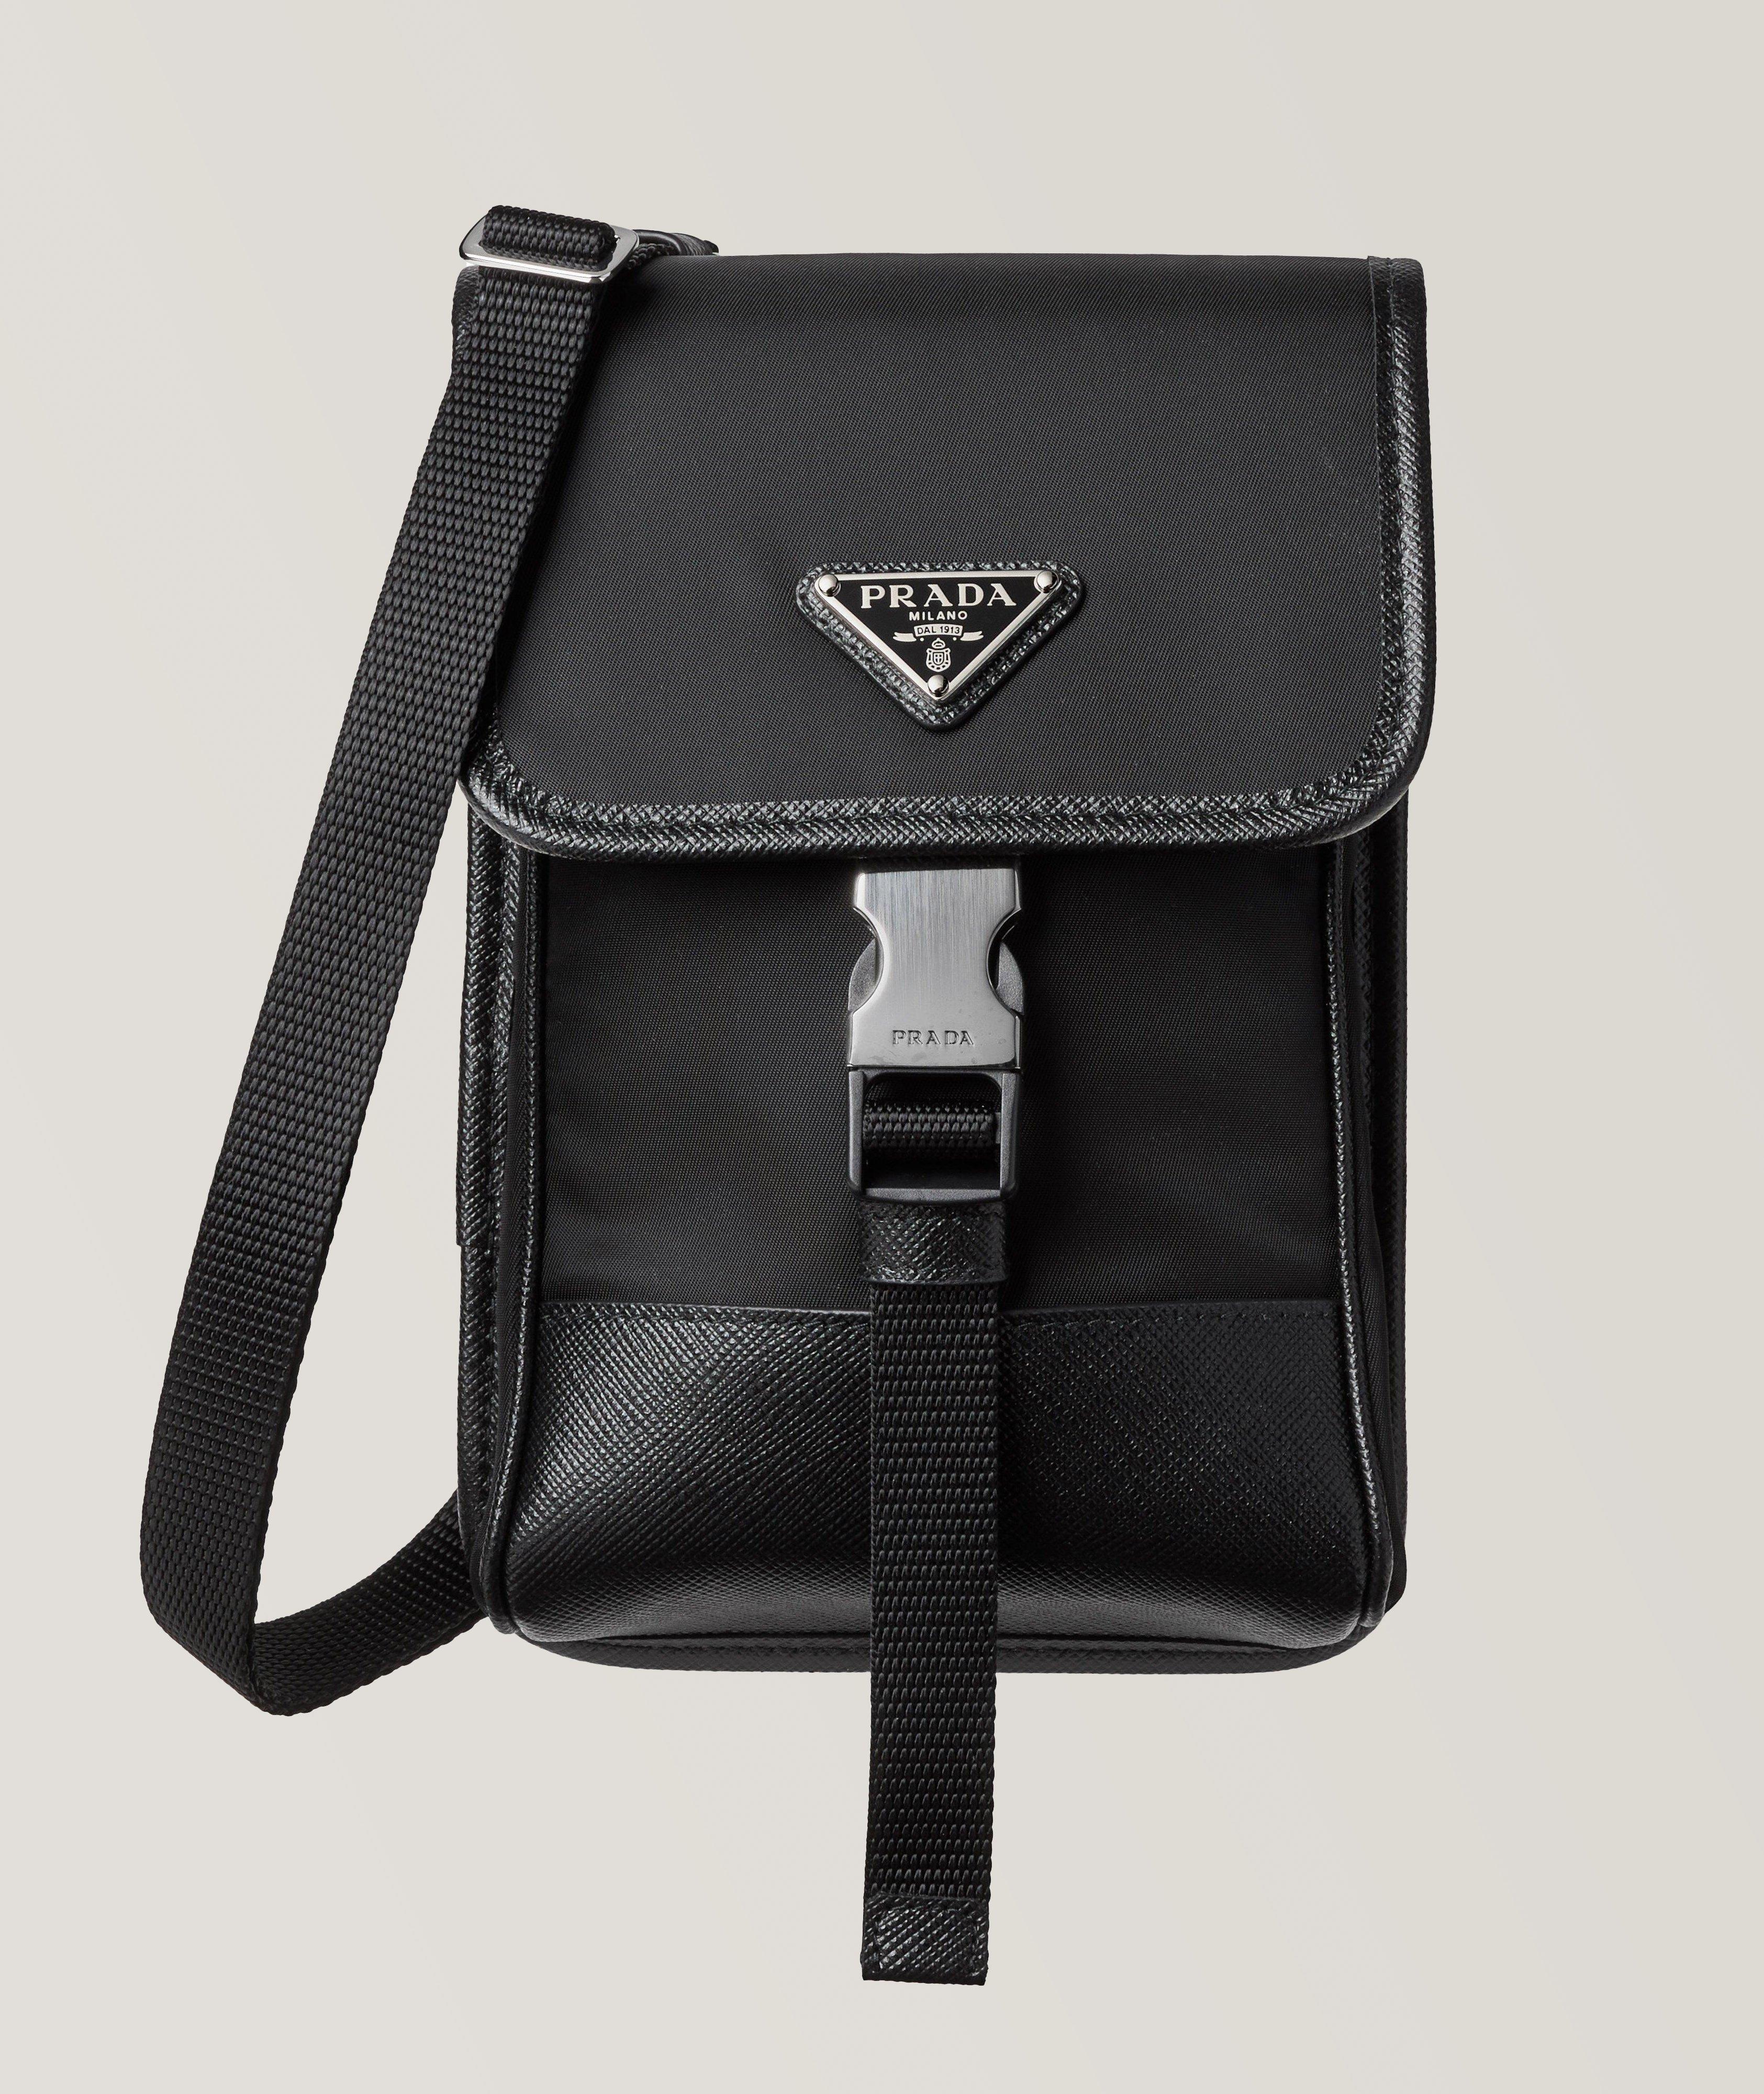 Prada Nylon And Saffiano Leather Smart Phone Carrier | Wallets | Harry ...